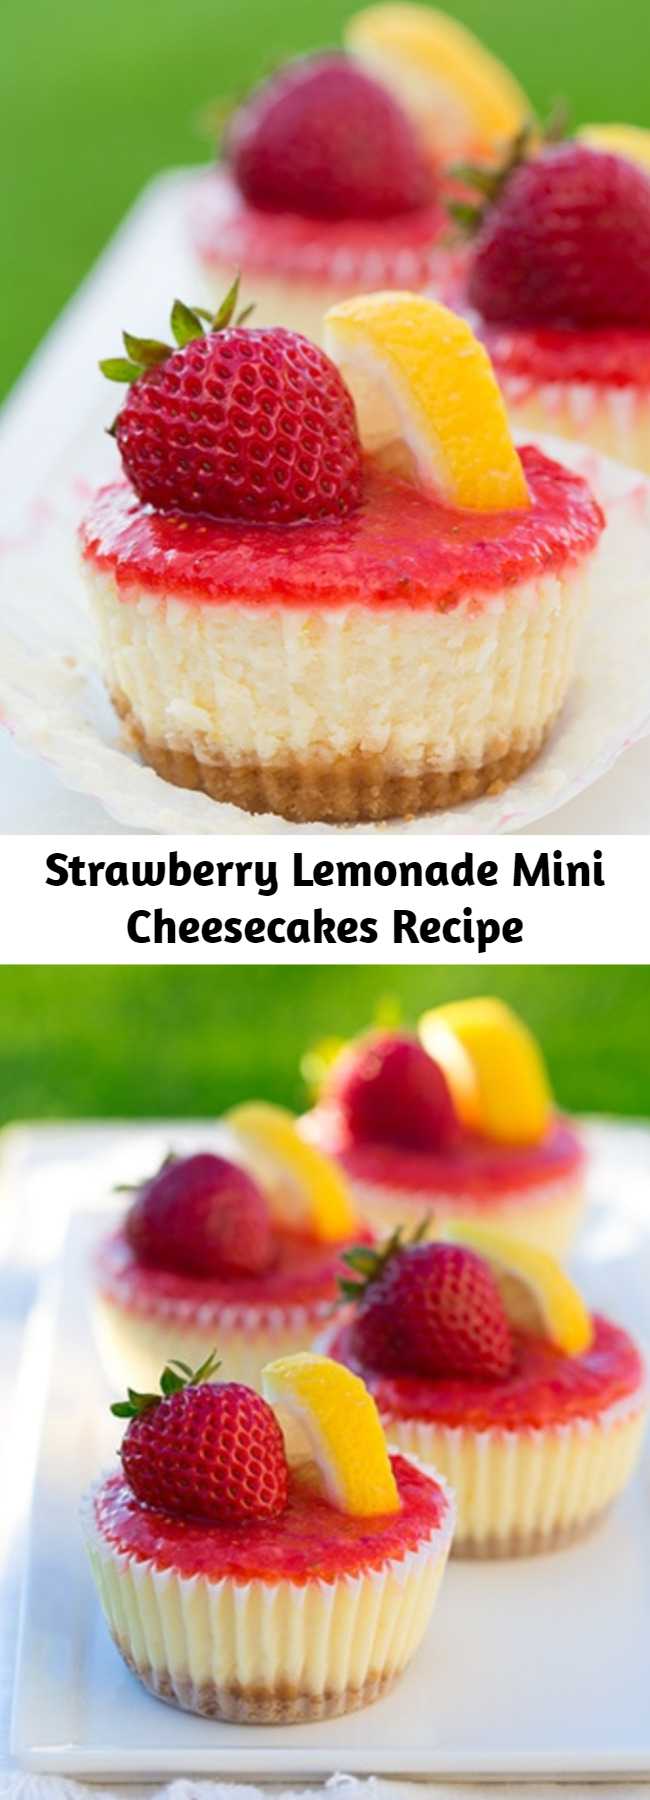 Strawberry Lemonade Mini Cheesecakes Recipe - Individual cheesecakes with the same irresistible refreshing flavor as a glass of strawberry lemonade. 